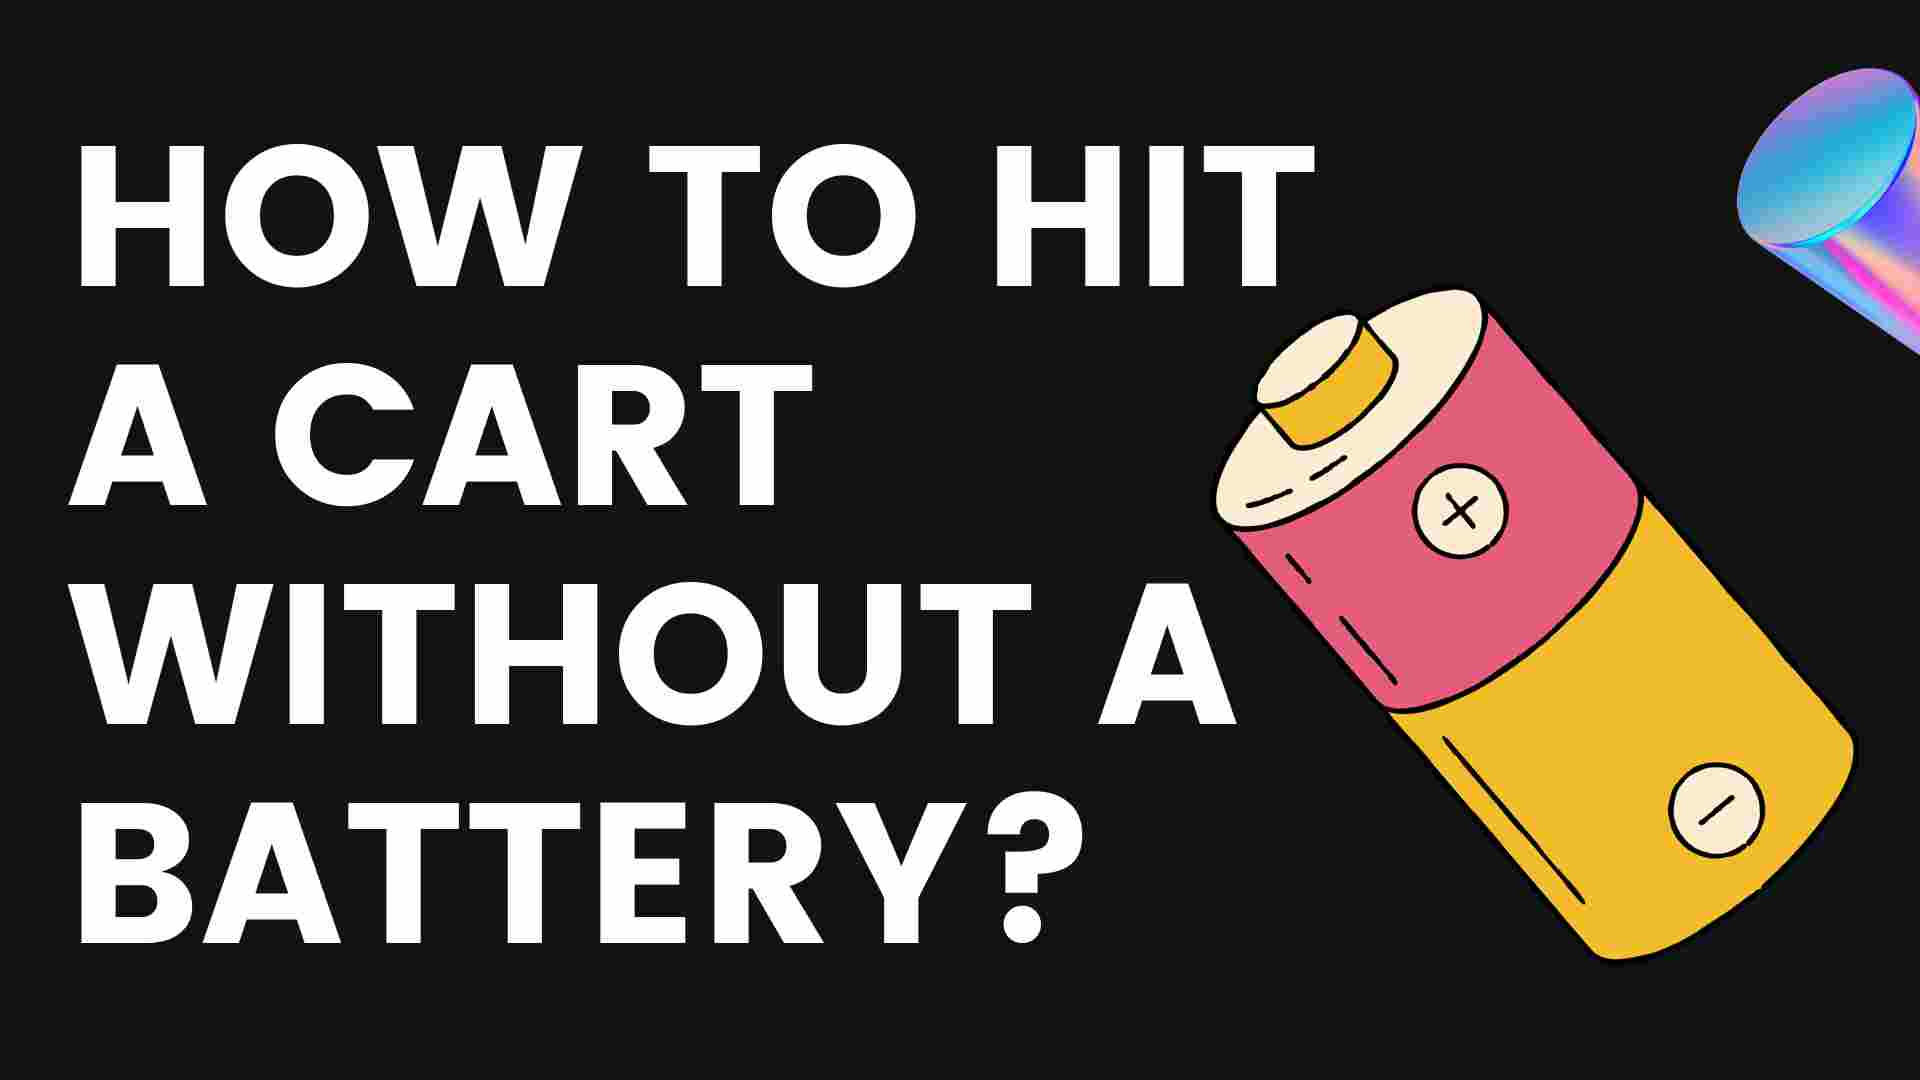 How To Hit A Cart Without A Battery